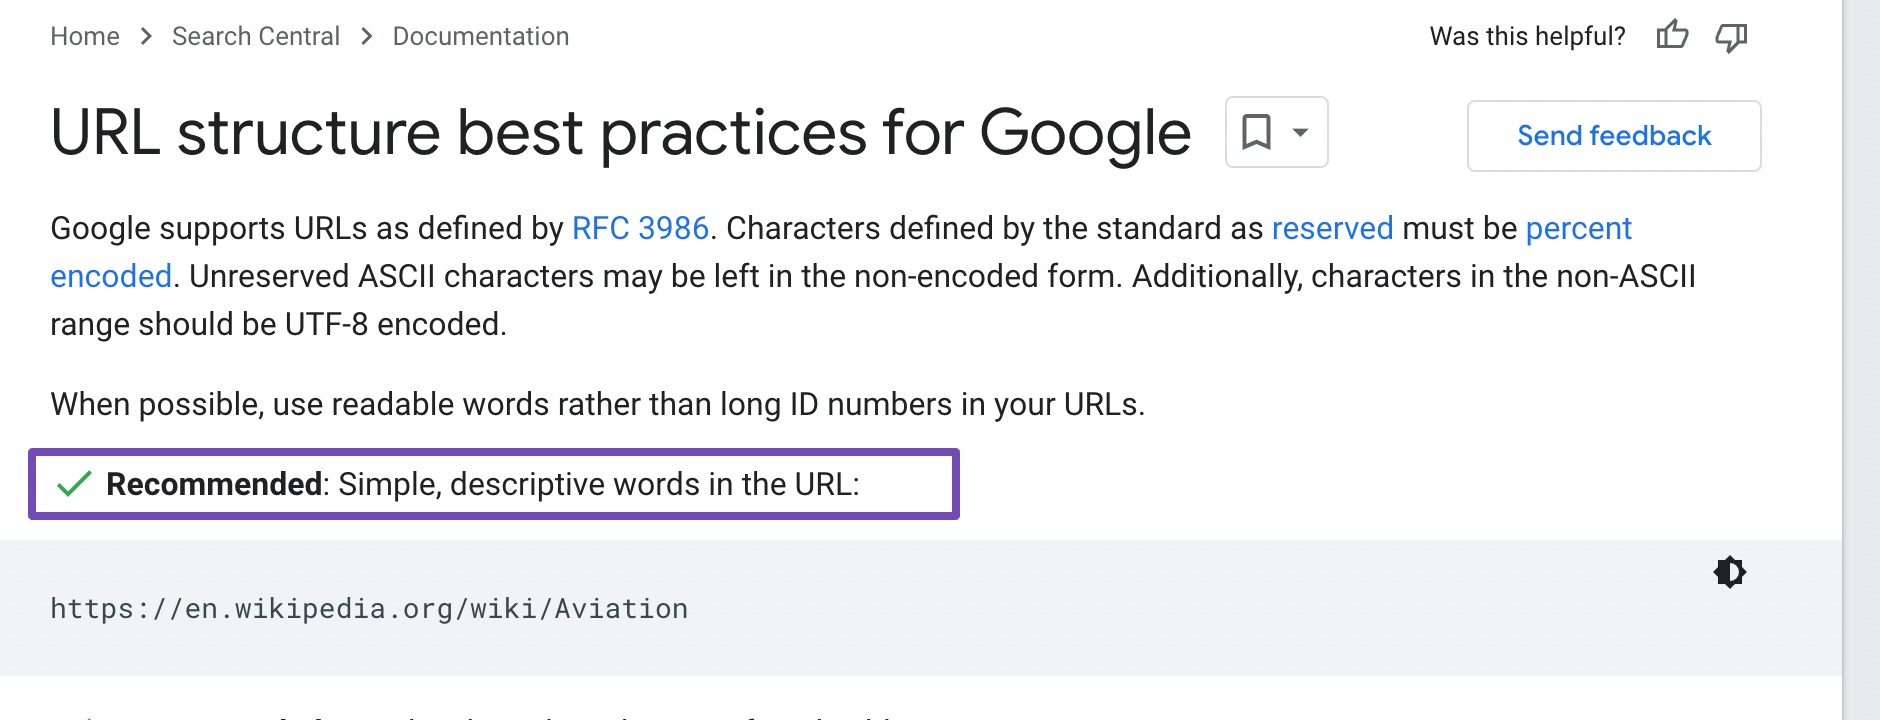 URL structure guidelines by Google